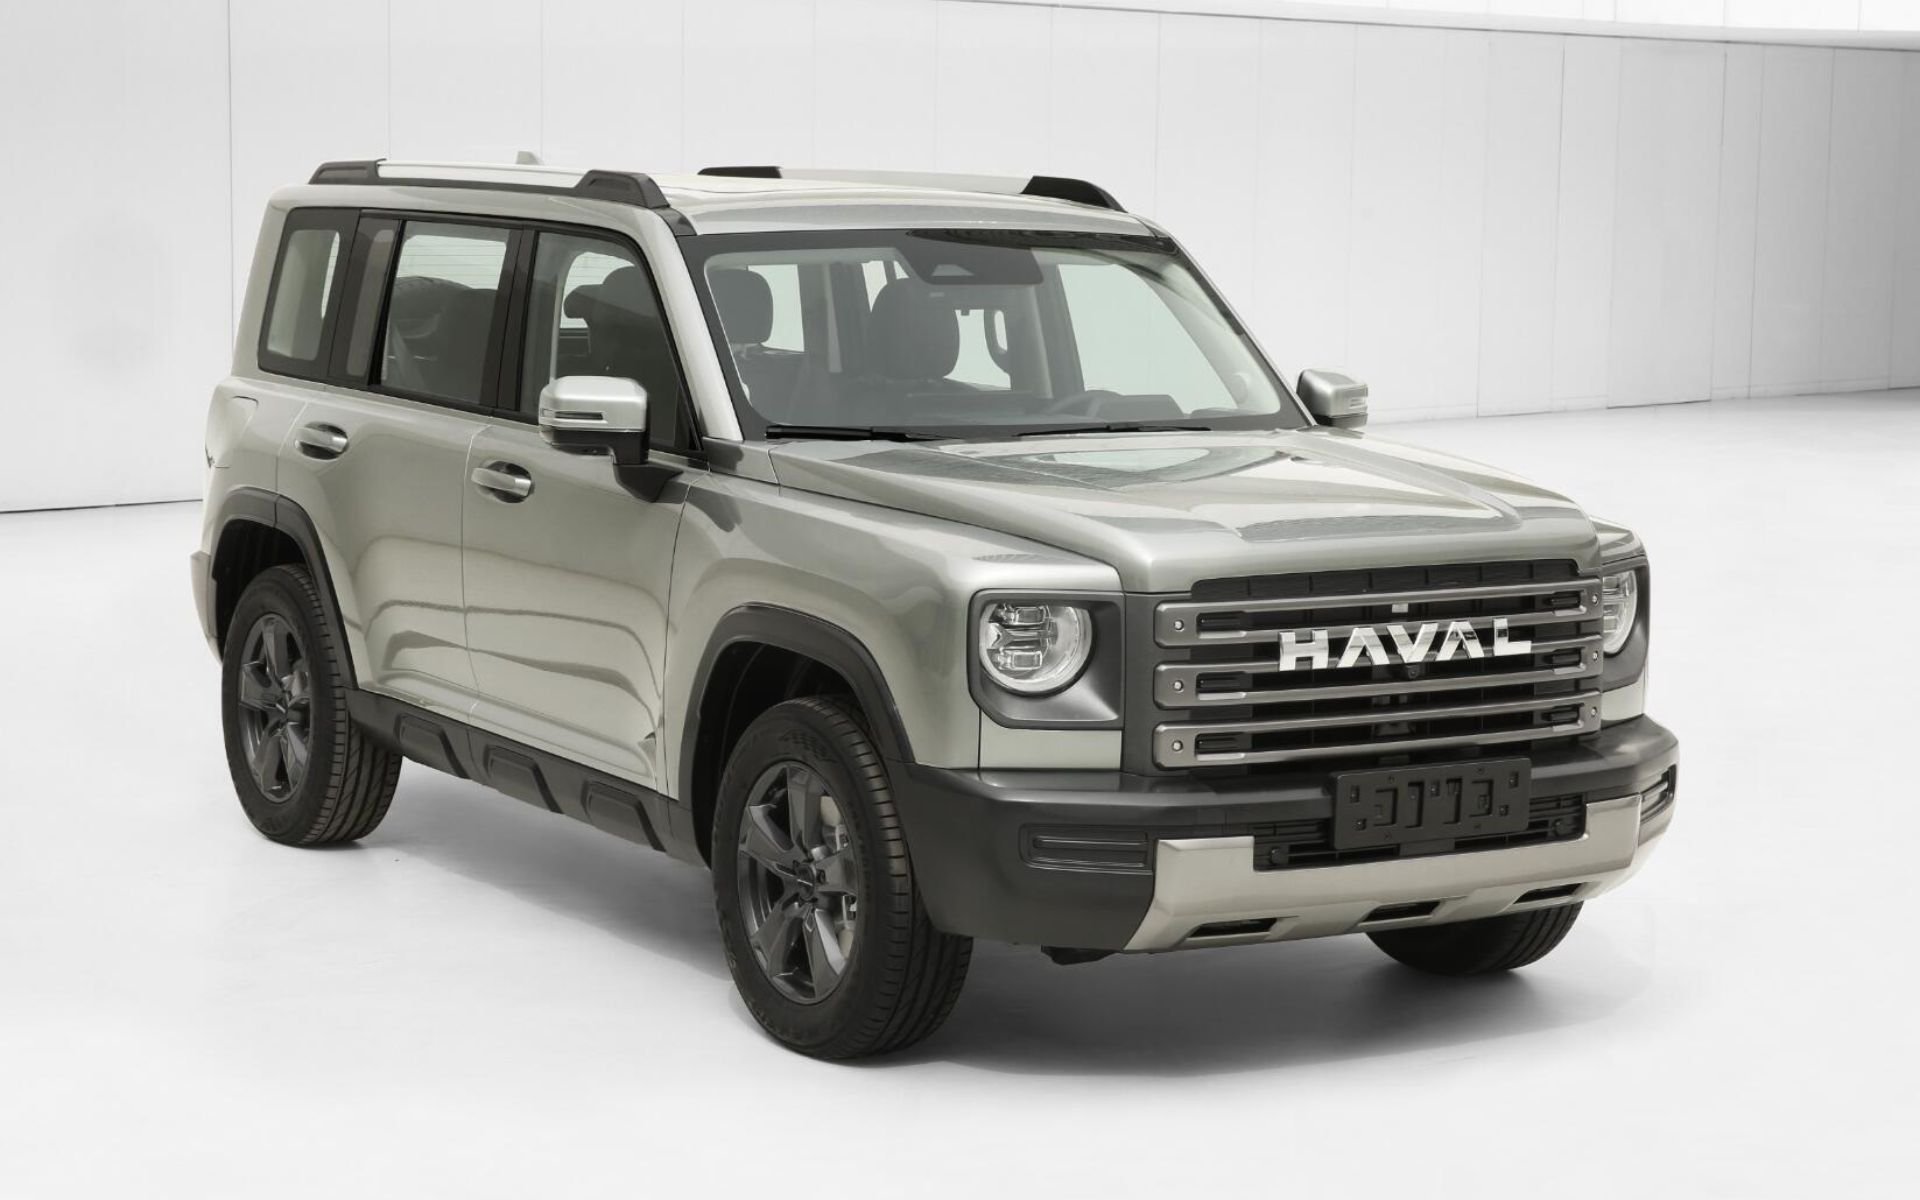 Haval Xianglong: To Land Rover Defender που «μιλάει» κινέζικα!